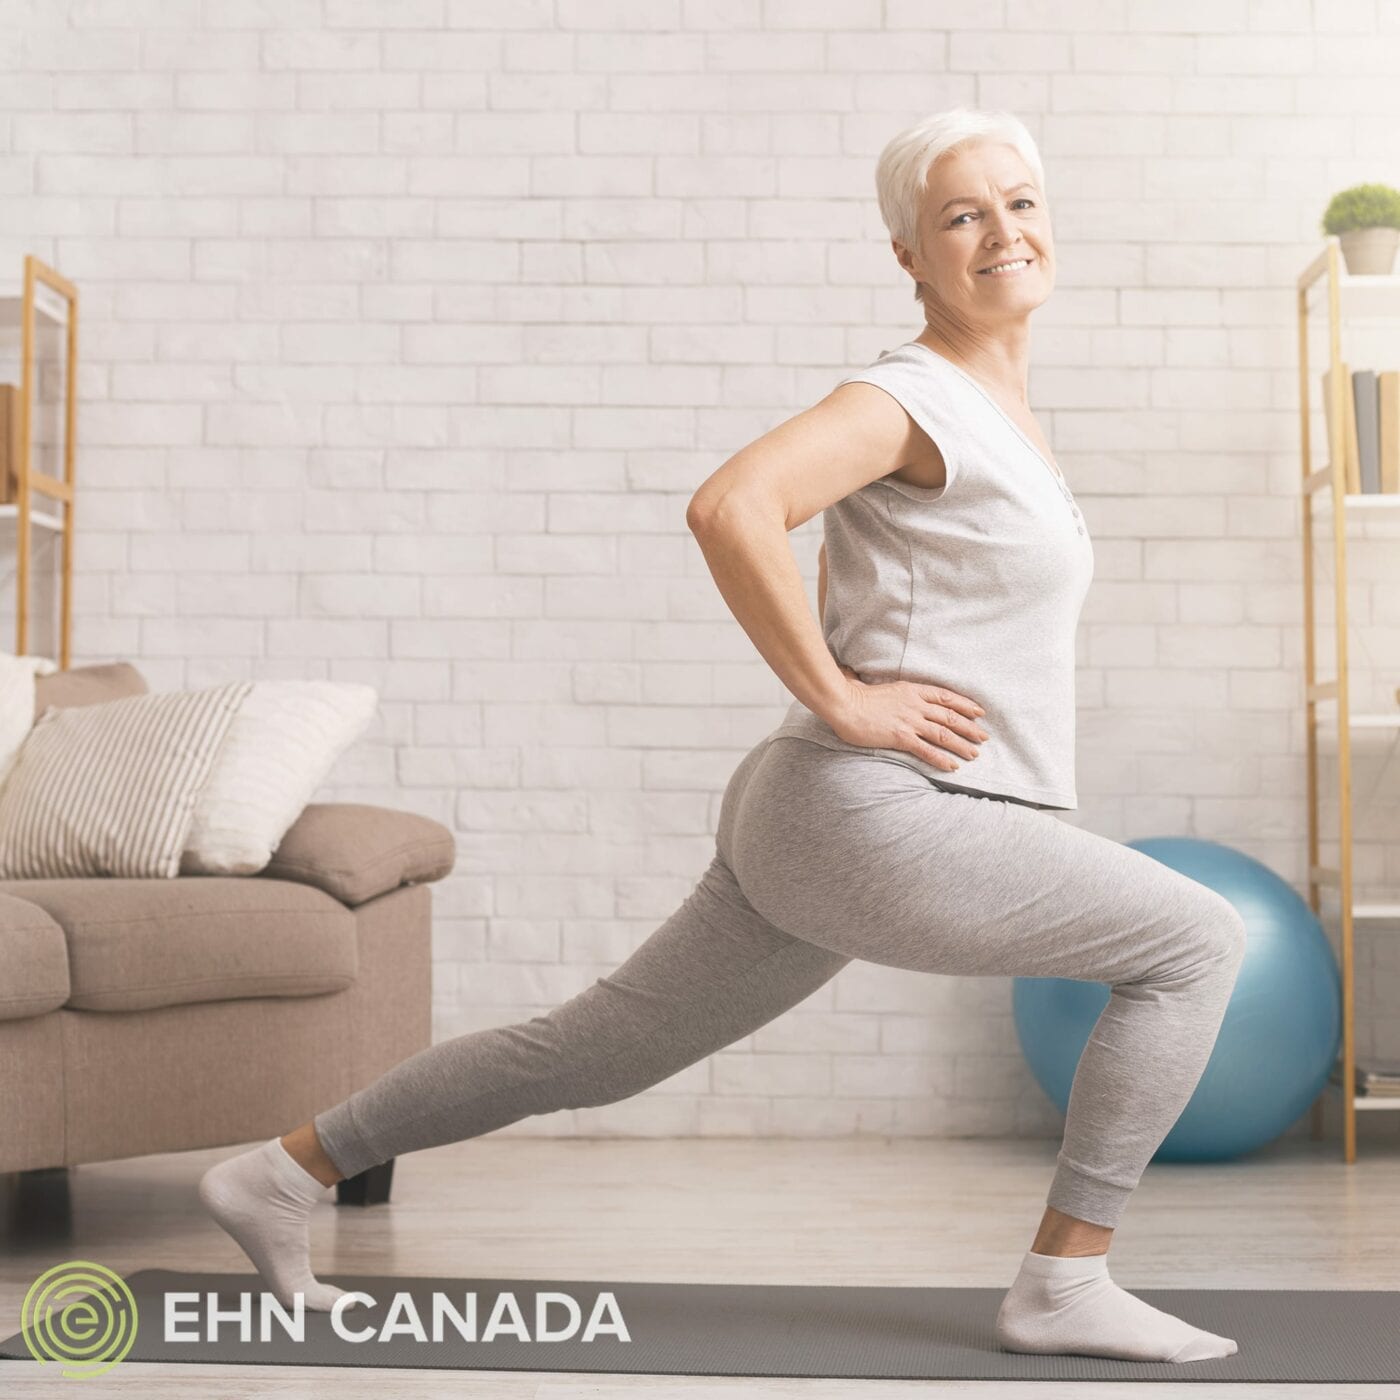 7 Exercises for a Great Home Workout During Self-Isolation